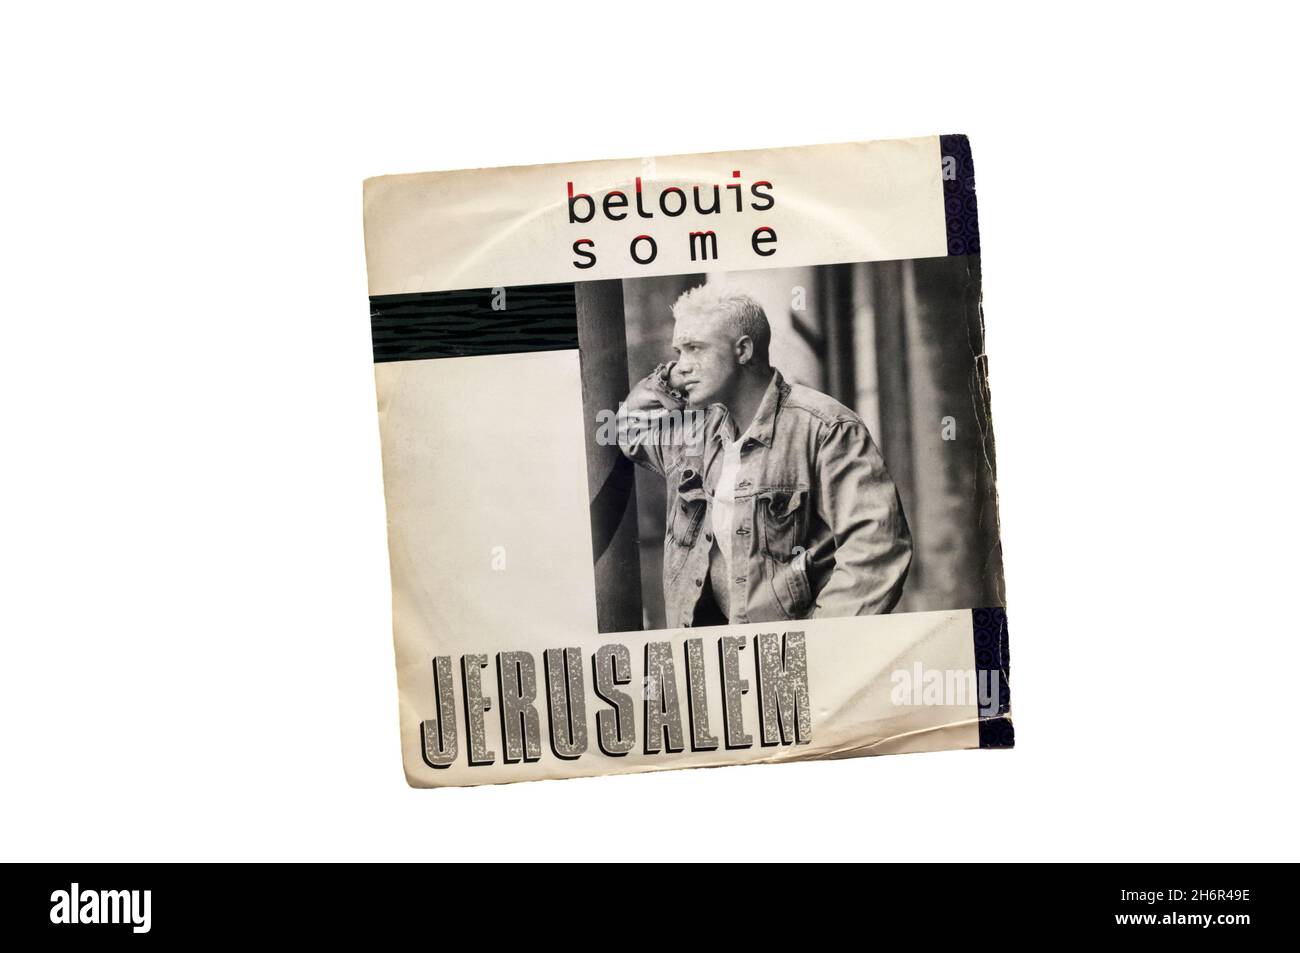 Fourth and final single by British artist Belouis Some, released in 1986 from debut studio album Some People. Stock Photo